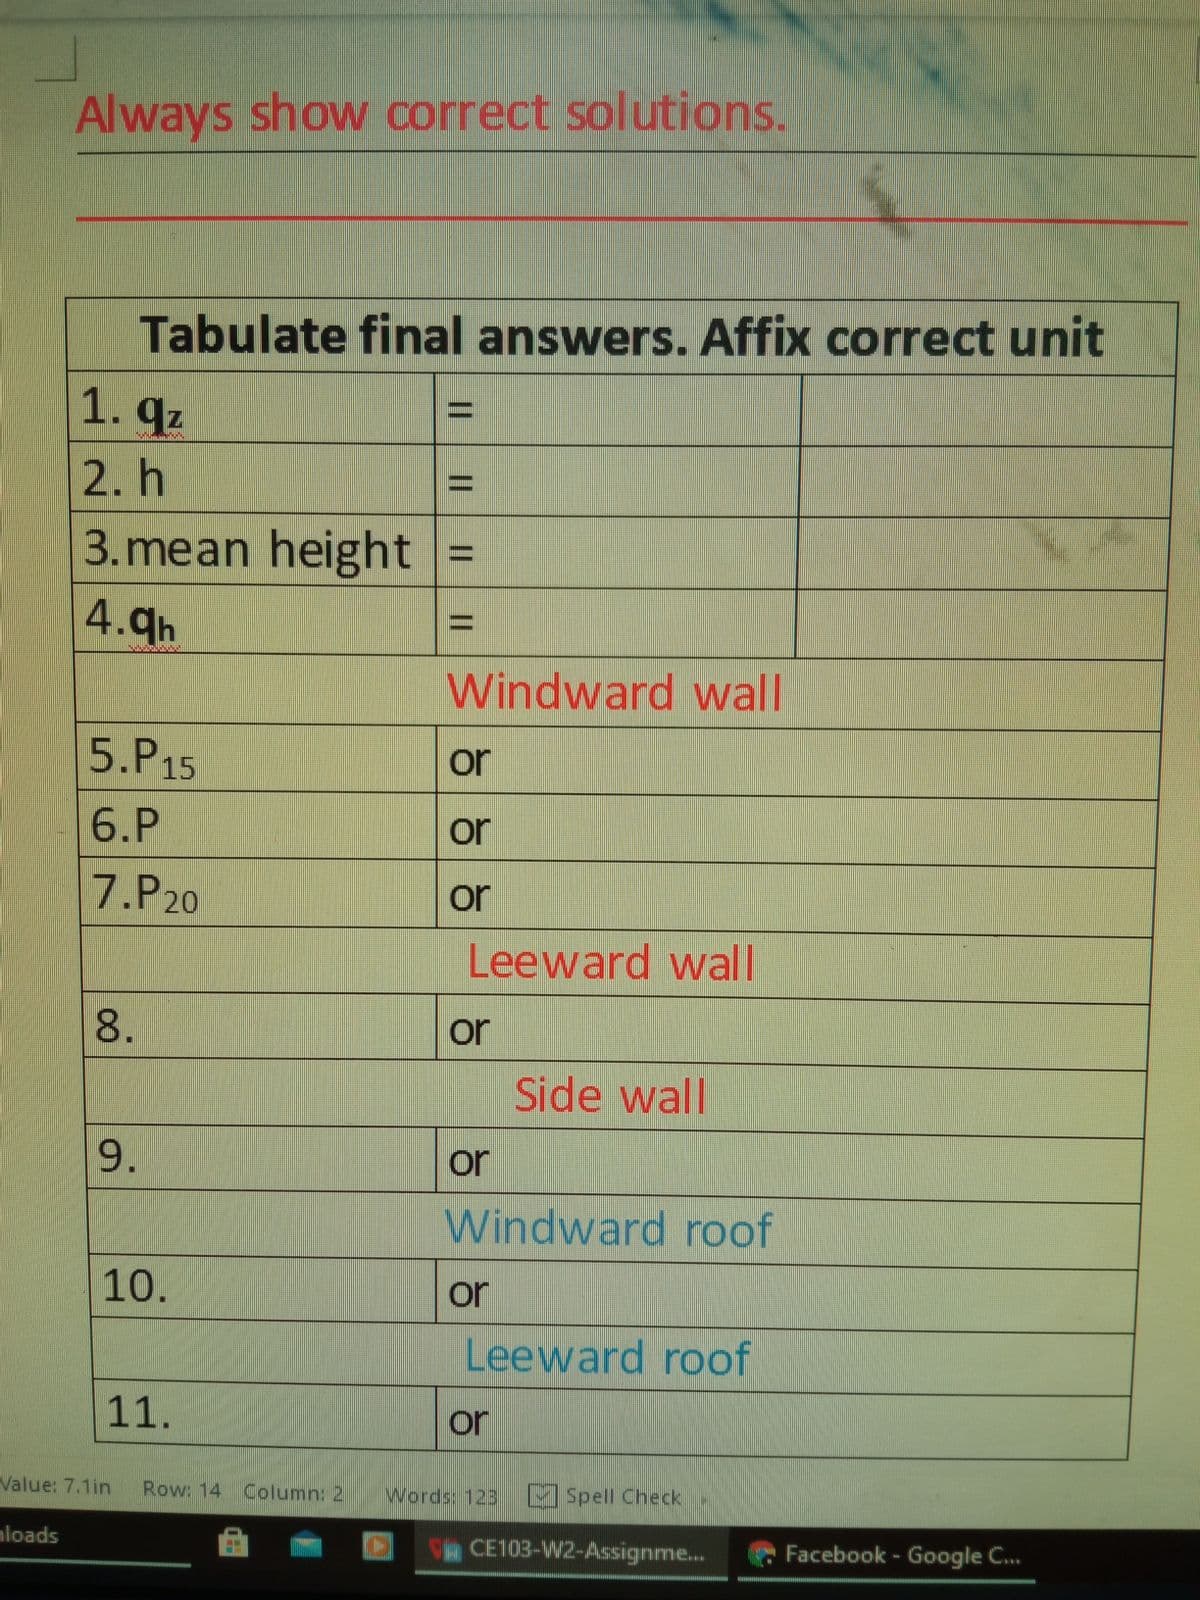 Always show correct solutions.
Tabulate final answers. Affix correct unit
1. qz
2. h
3. mean height
%D
4.9h
Windward wall
5.P15
or
6.P
or
7.P20
or
Leeward wall
or
Side wall
9.
or
Windward roof
10.
or
Leeward roof
11.
or
Value: 7.1in
Row: 14 Column: 2
Words: 123
MSpell Check
mloads
CE103-W2-Assignme...
Facebook - Google C...
%3D
8.
